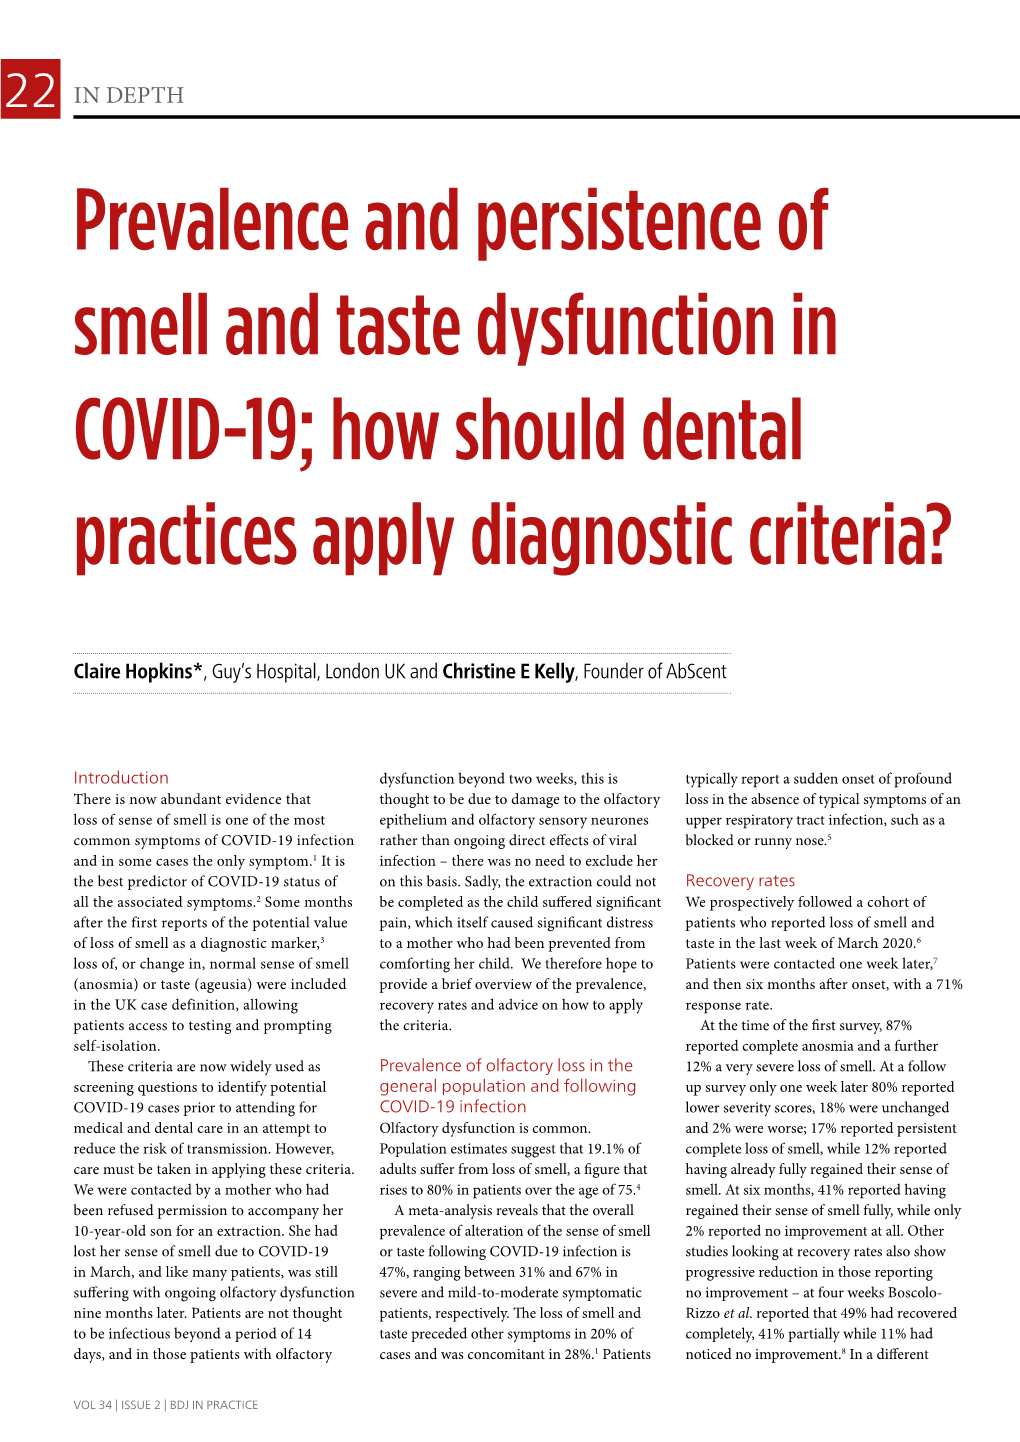 Prevalence and Persistence of Smell and Taste Dysfunction in COVID-19; How Should Dental Practices Apply Diagnostic Criteria?